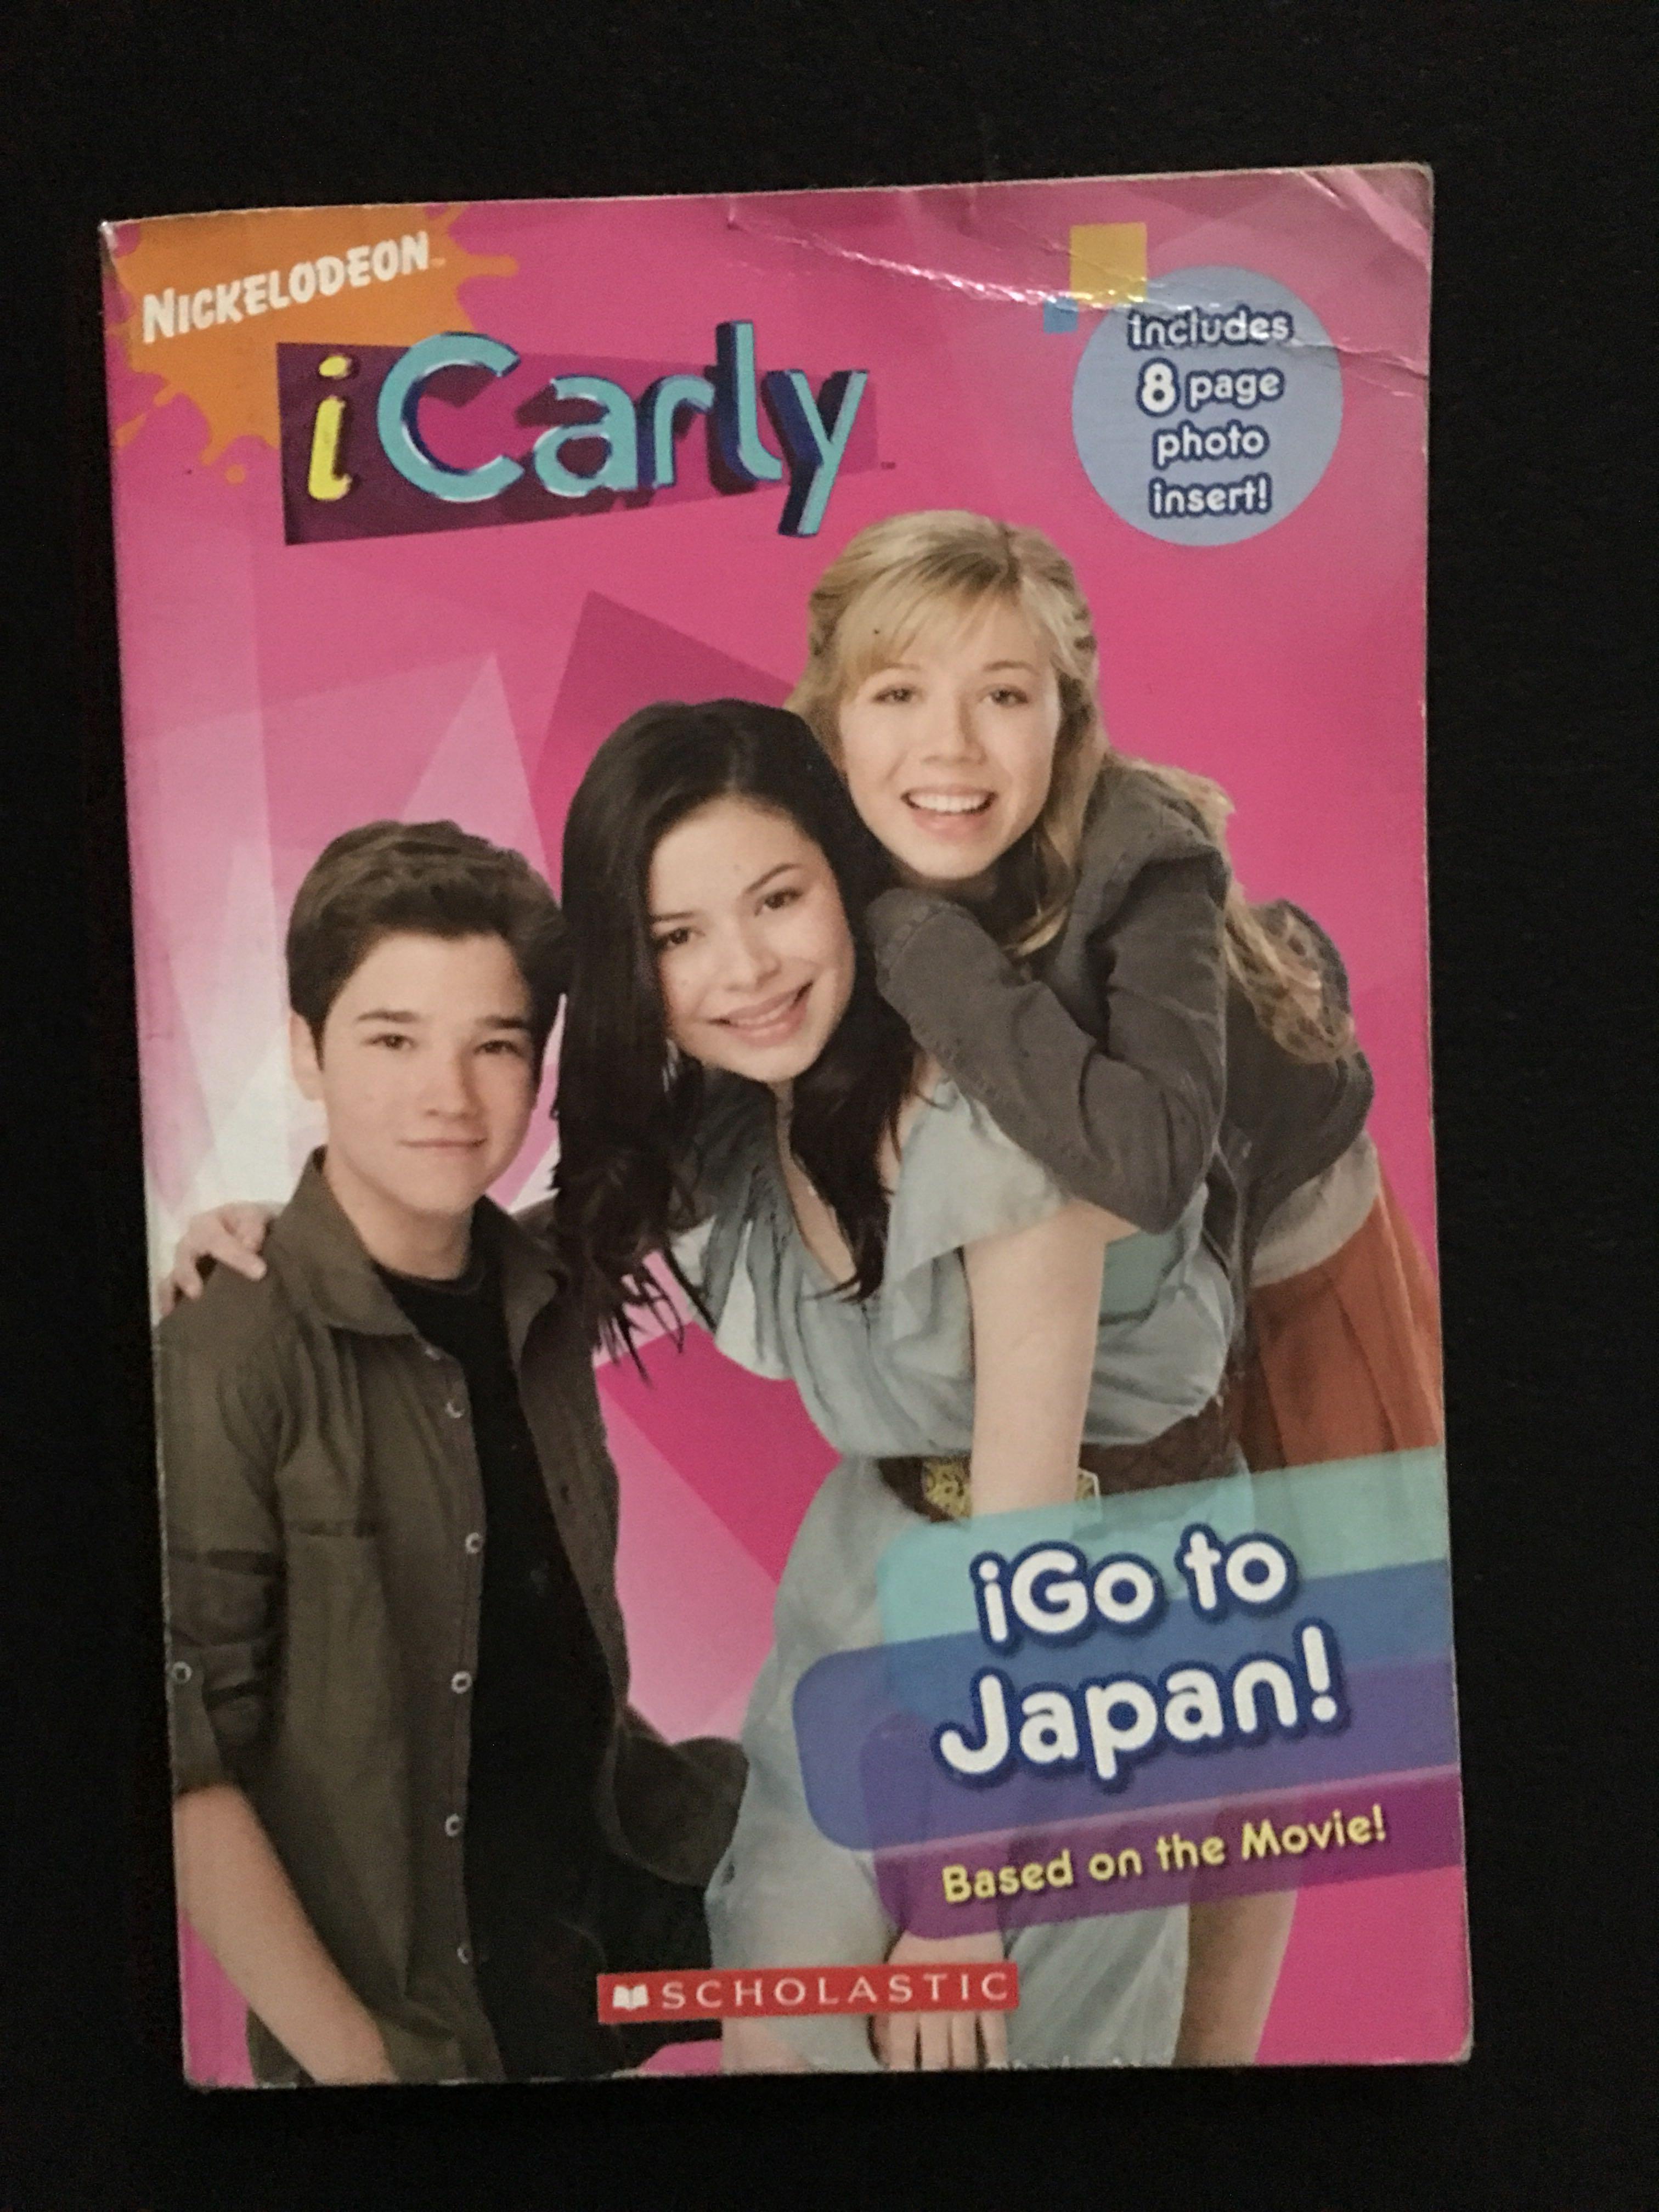 Nickelodeon Icarly Igo Japan Based On The Movie Scholastic Preloved Books Children S Books On Carousell